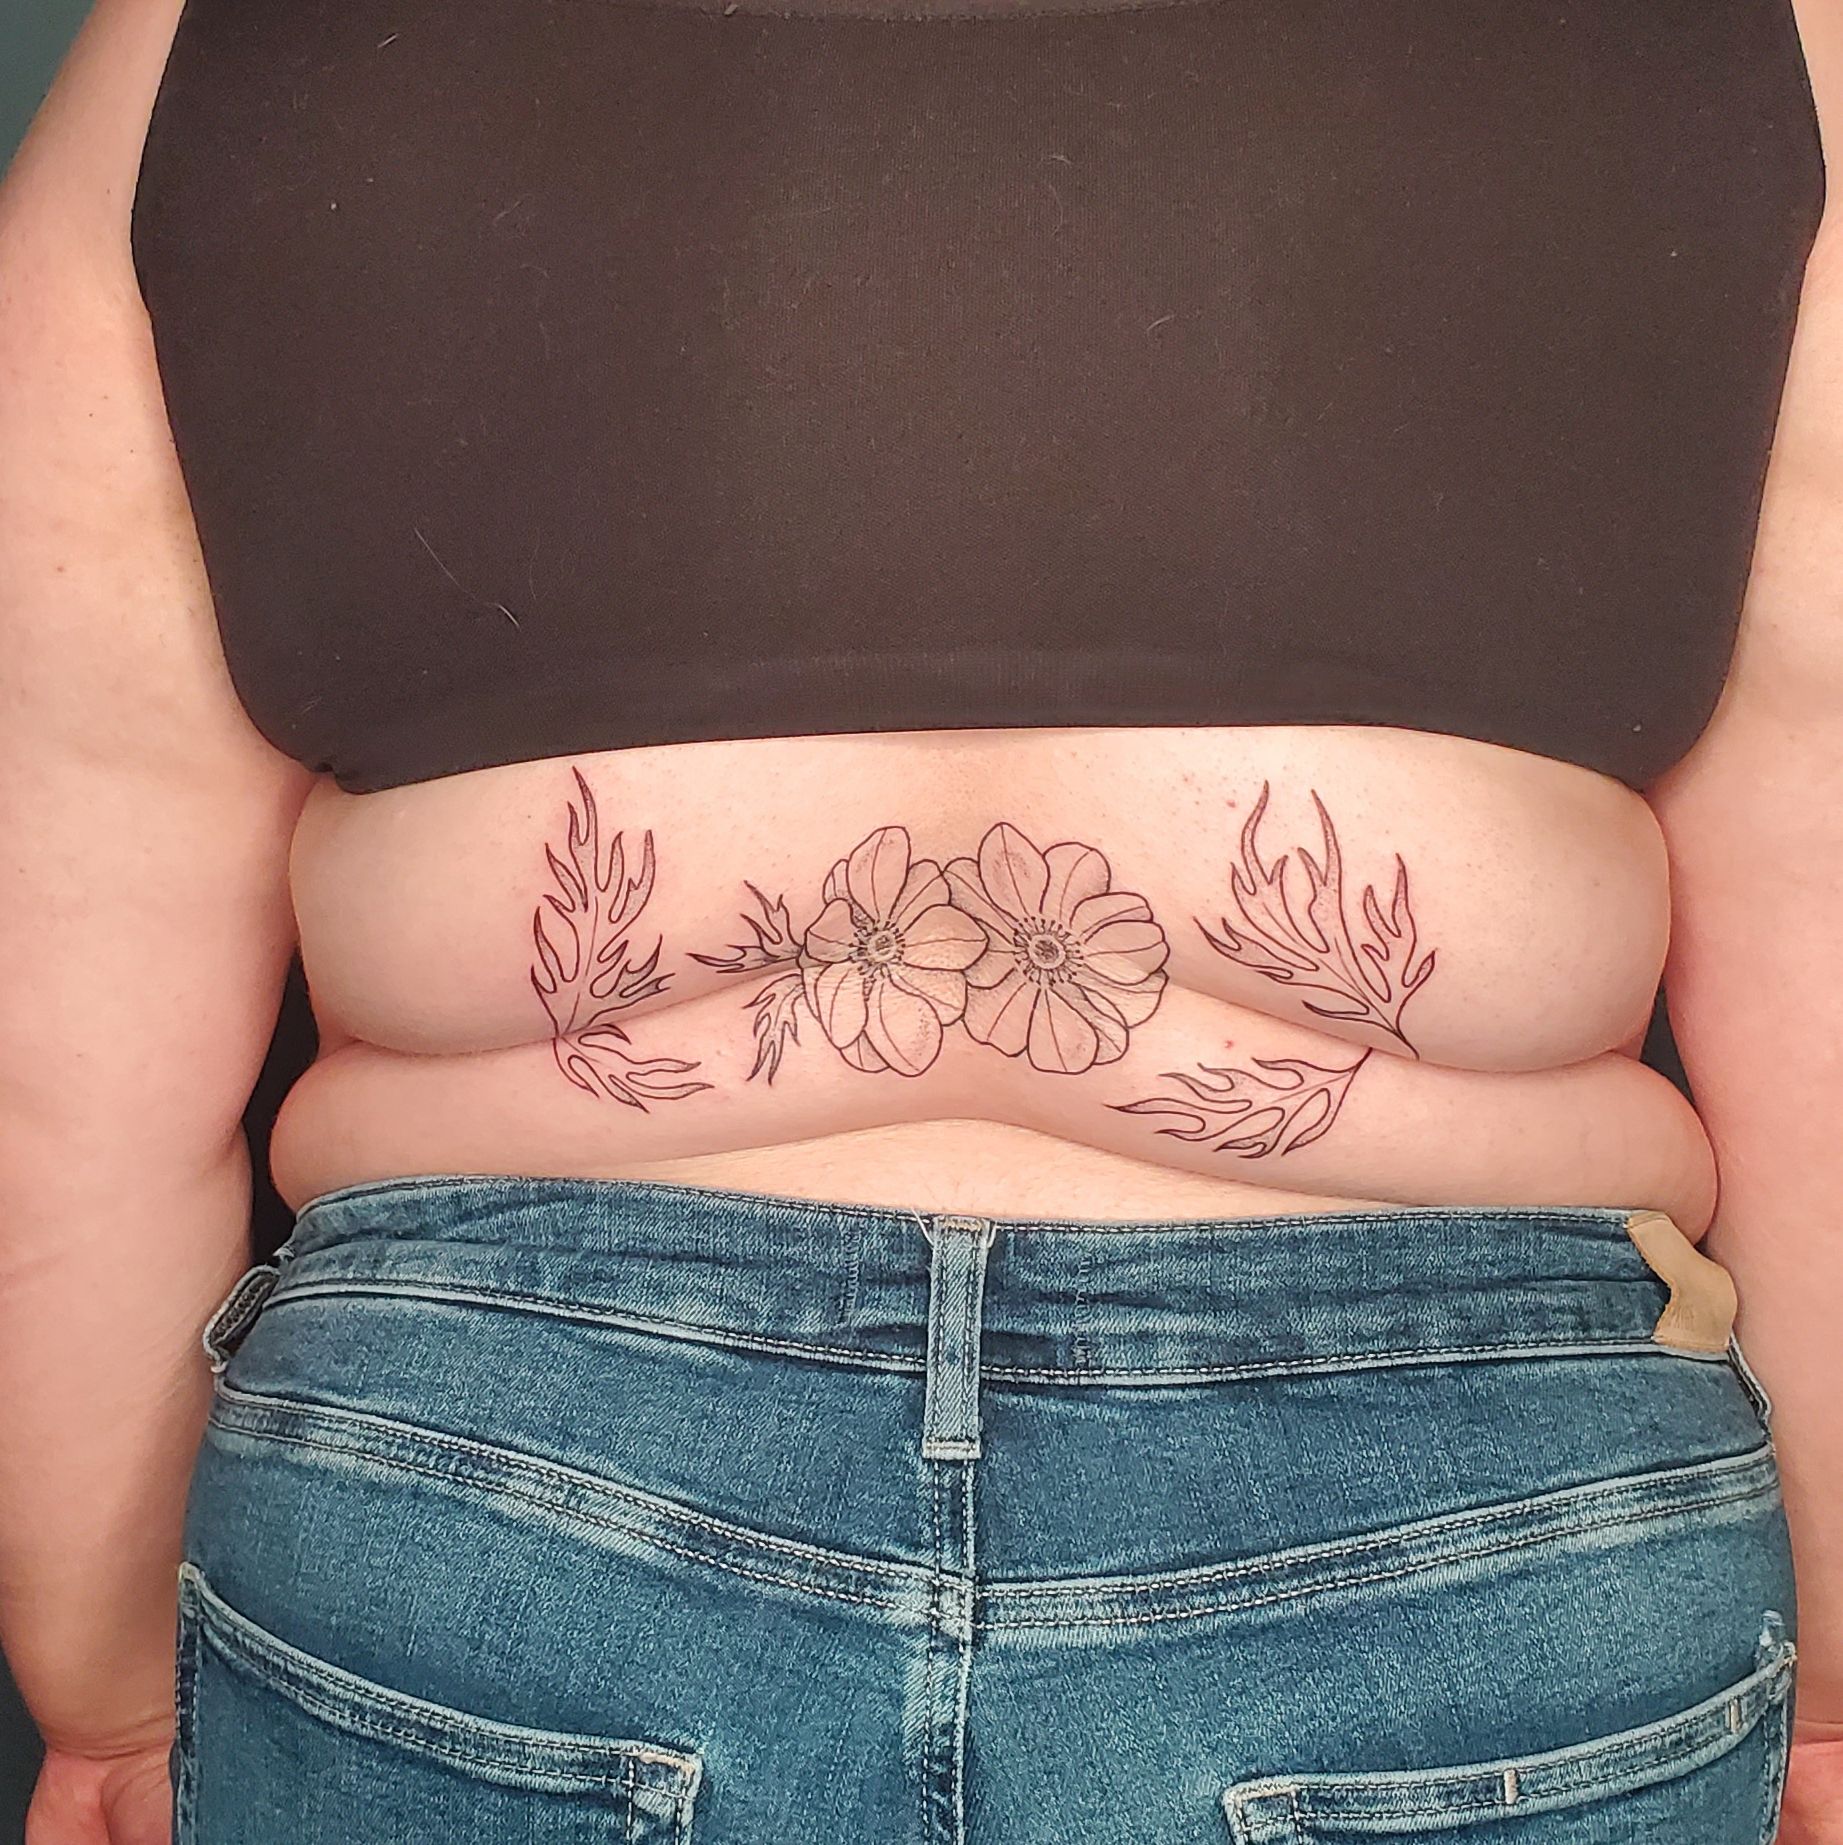 Tattoo Artist Develops Flower Roll Tattoos Specifically for Fat Bodies —  See Photos